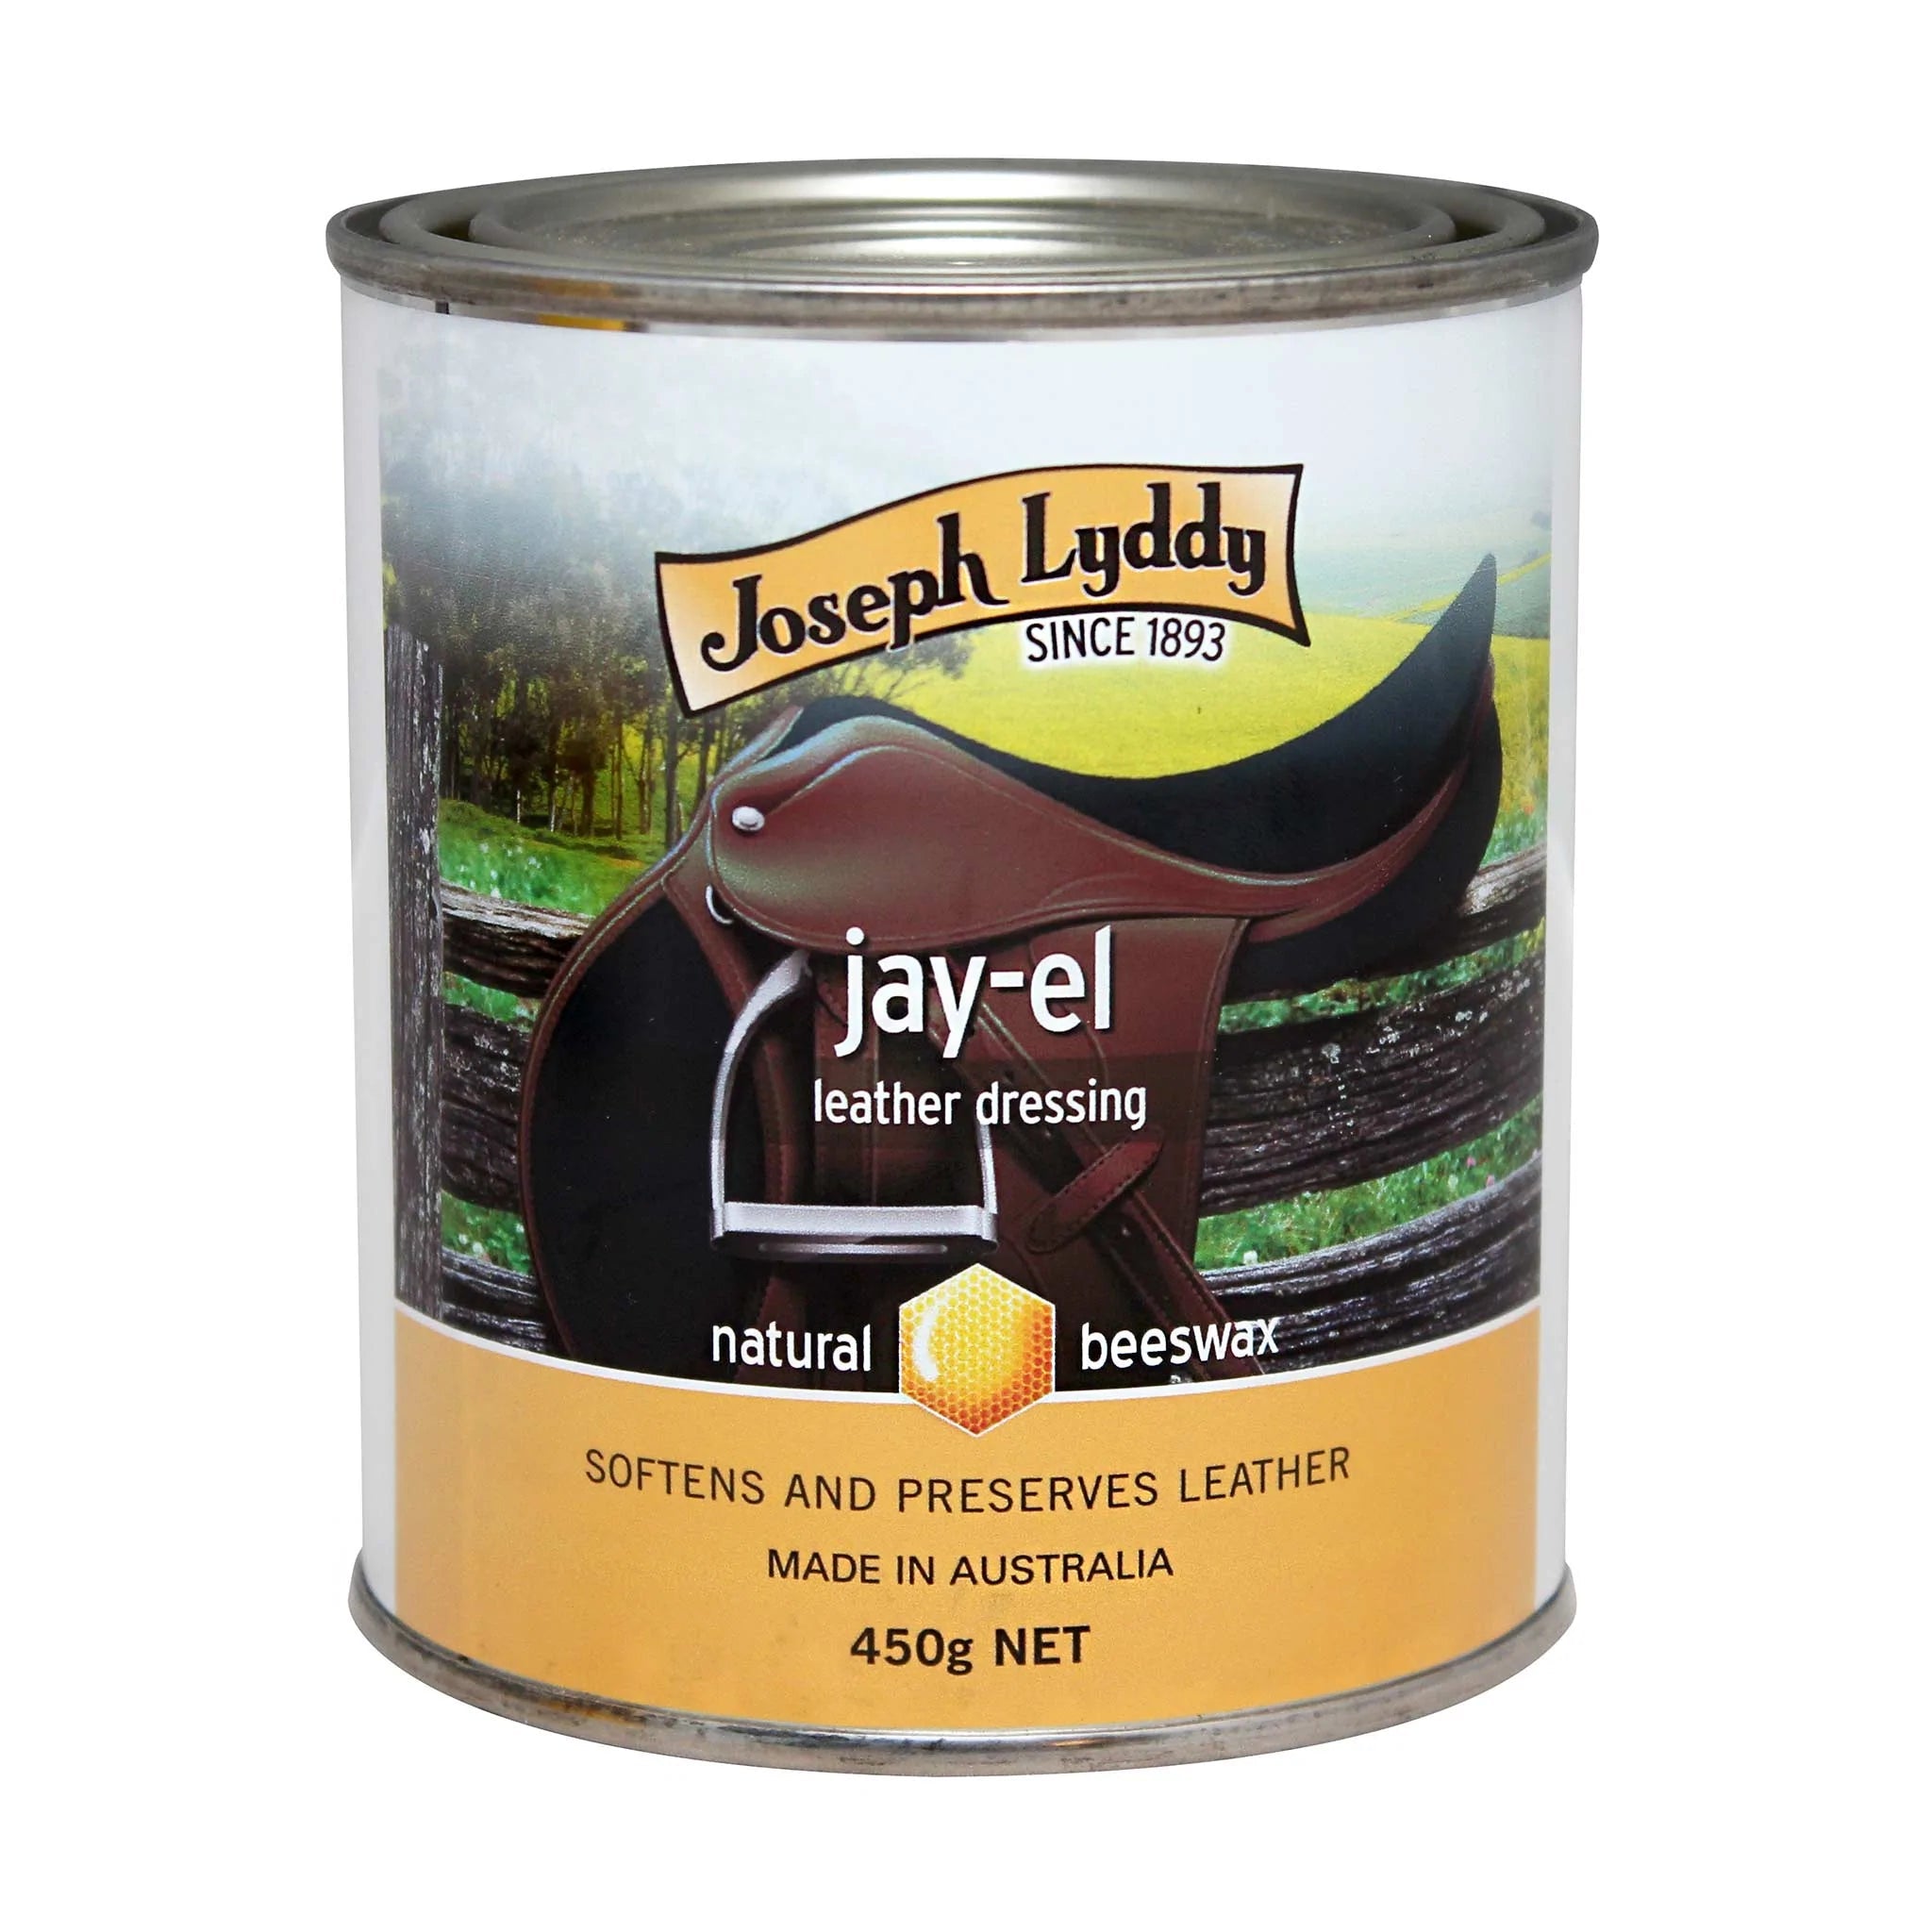 JOSEPH LYDDY JAY-EL LEATHER DRESSING 450g-Ranges Country